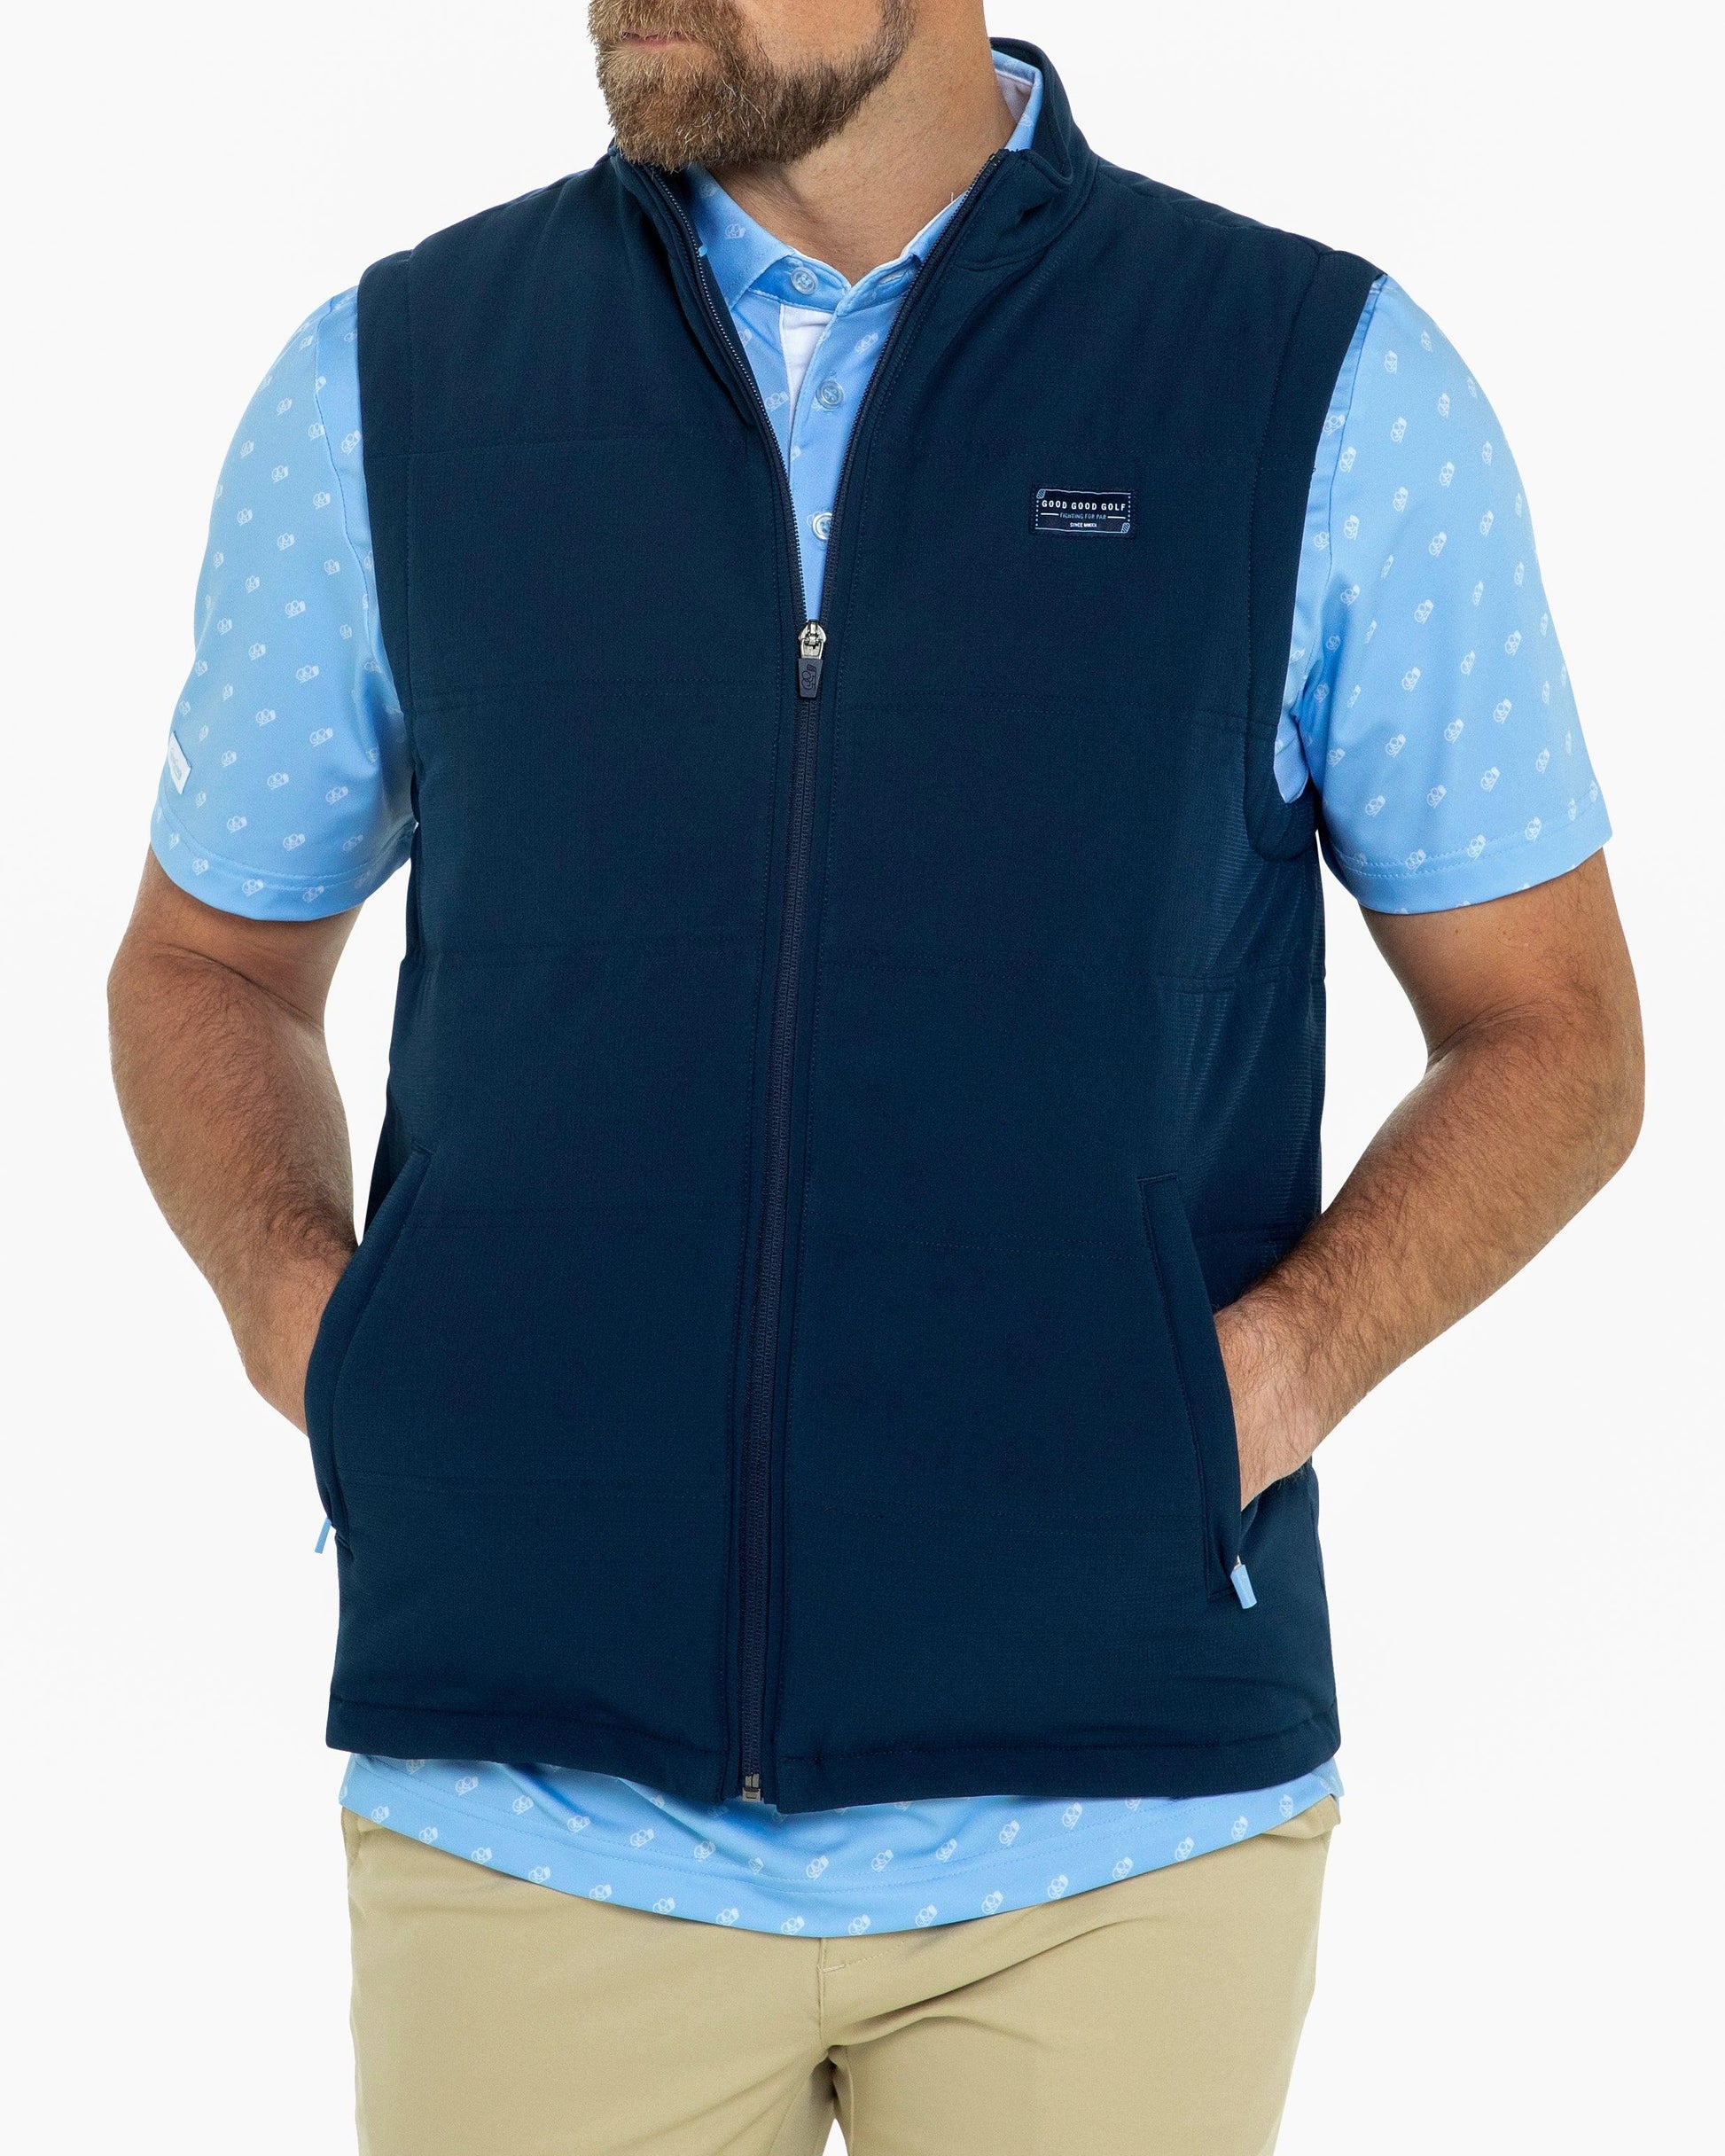 Flyer Quilted Vest - Stay Warm and Comfortable On and Off The Course